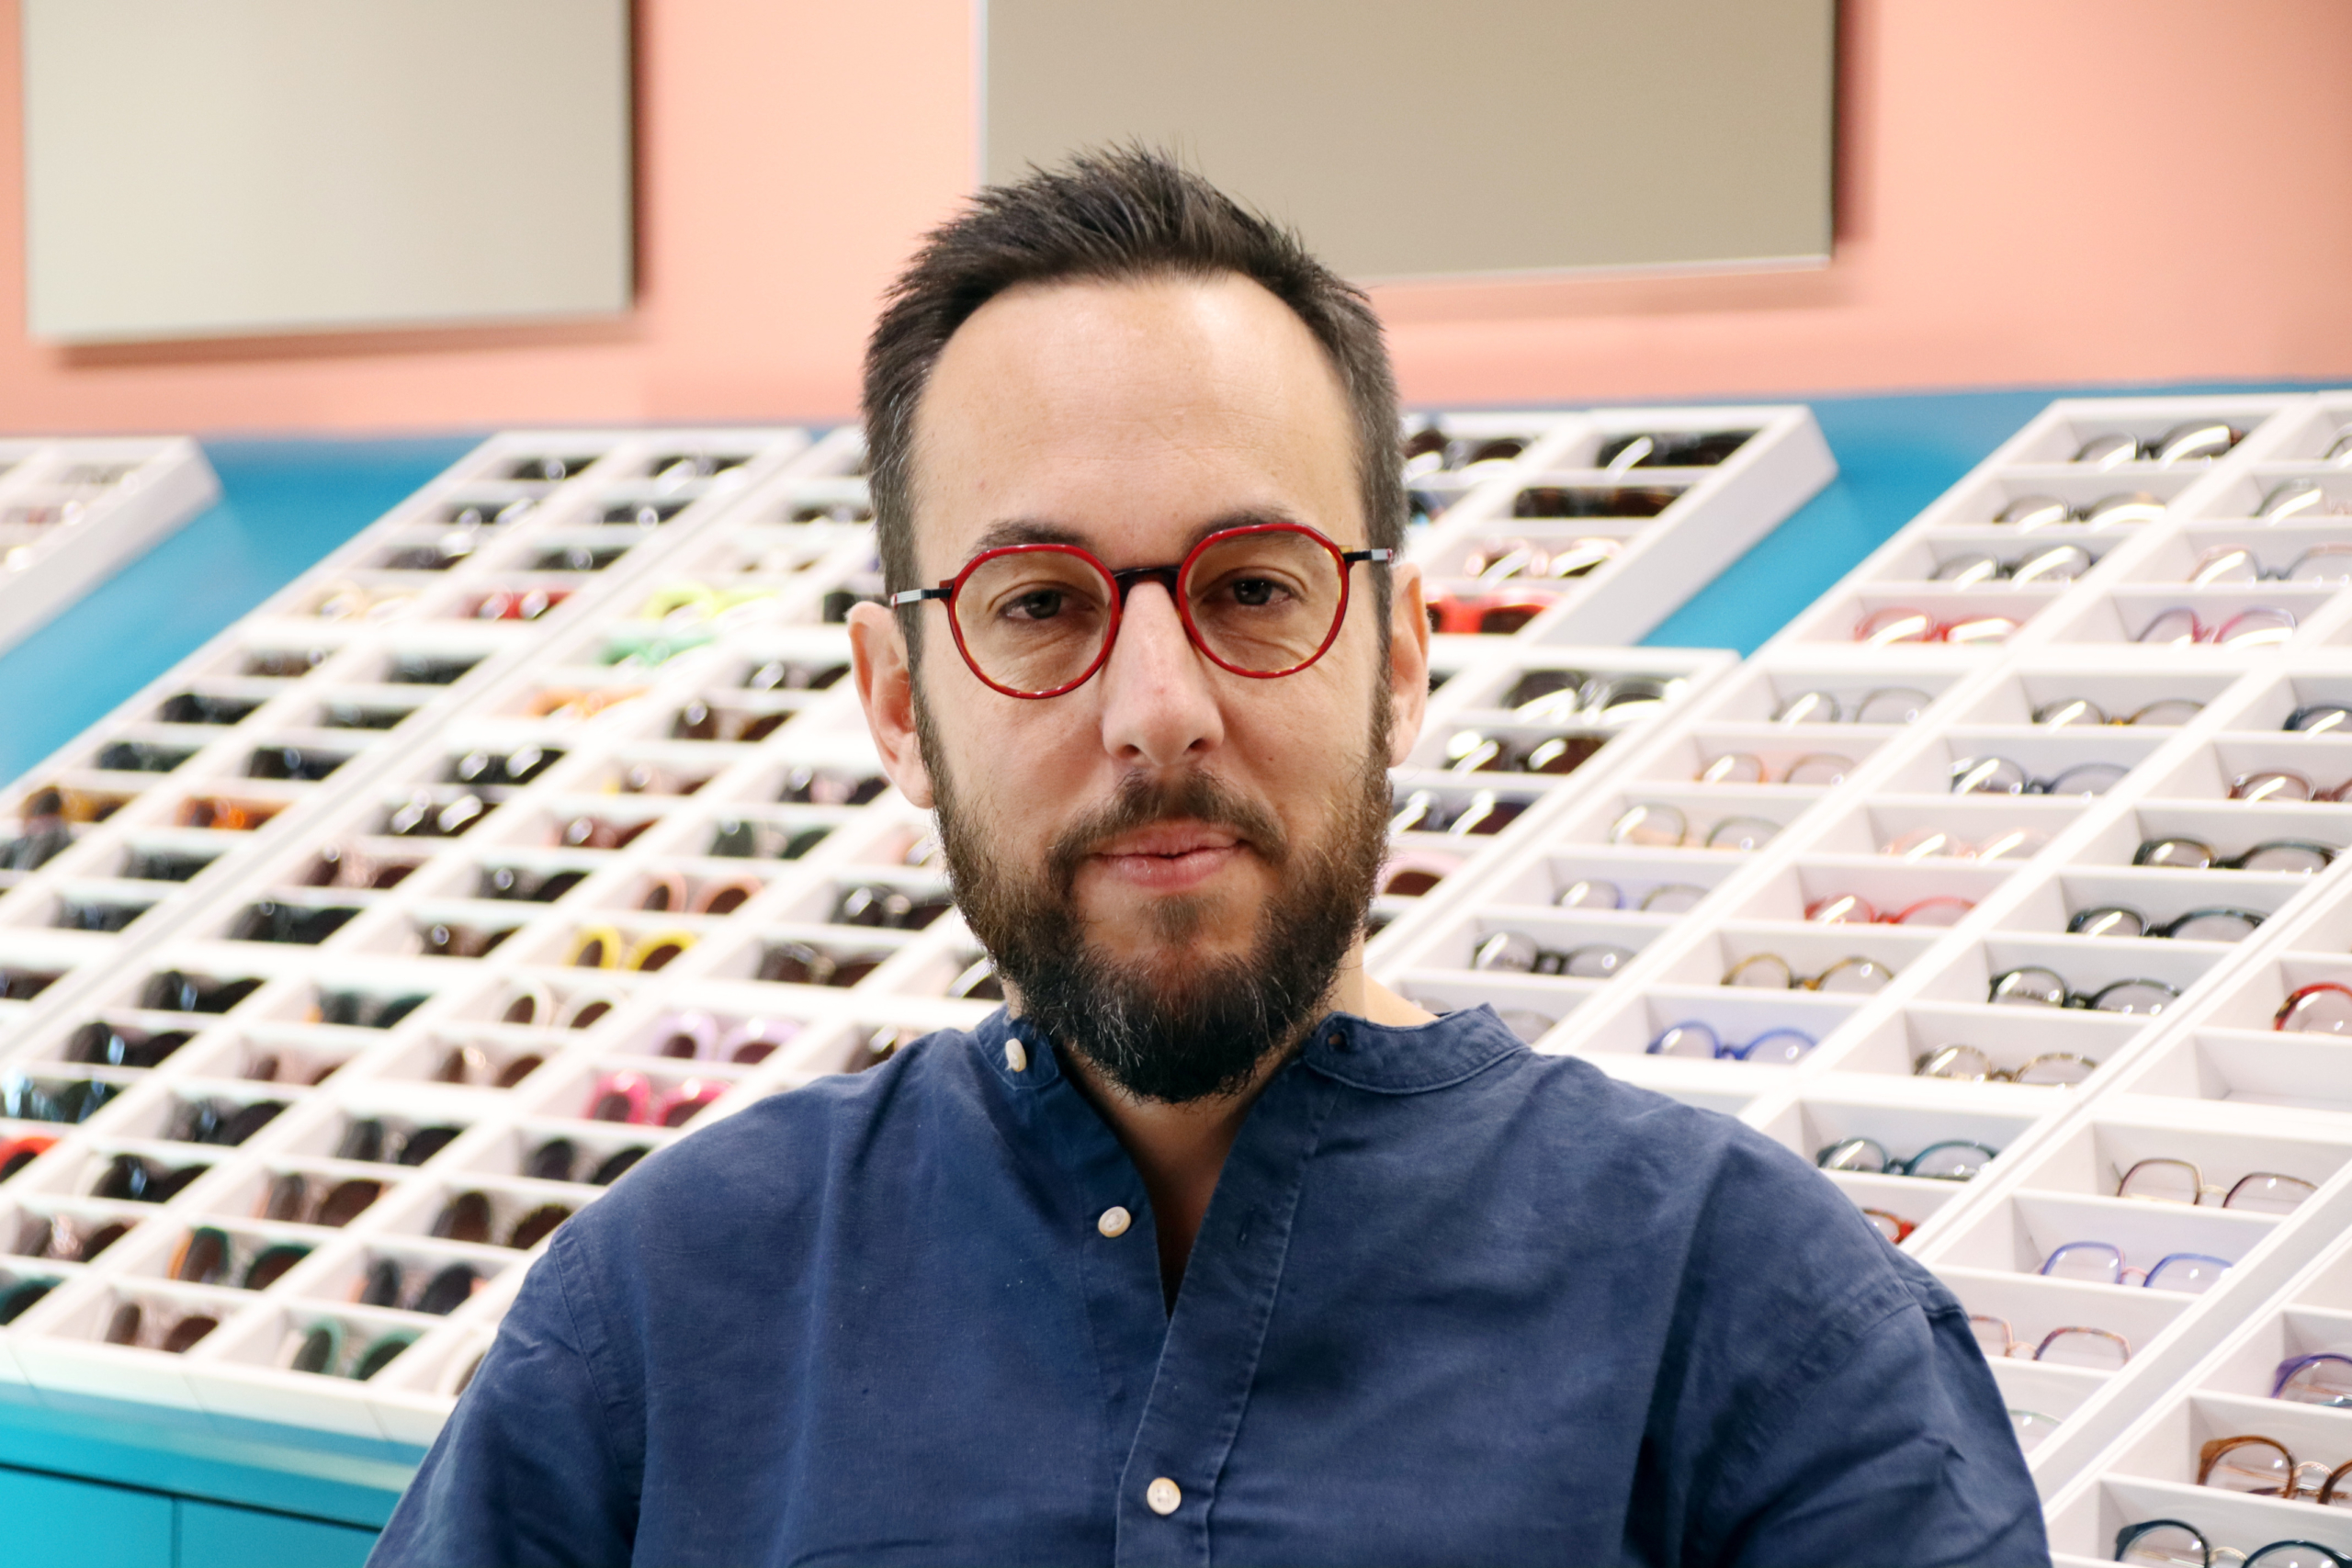 The Catalan eyewear brand has a turnover of 17 million and is present in 72 countries